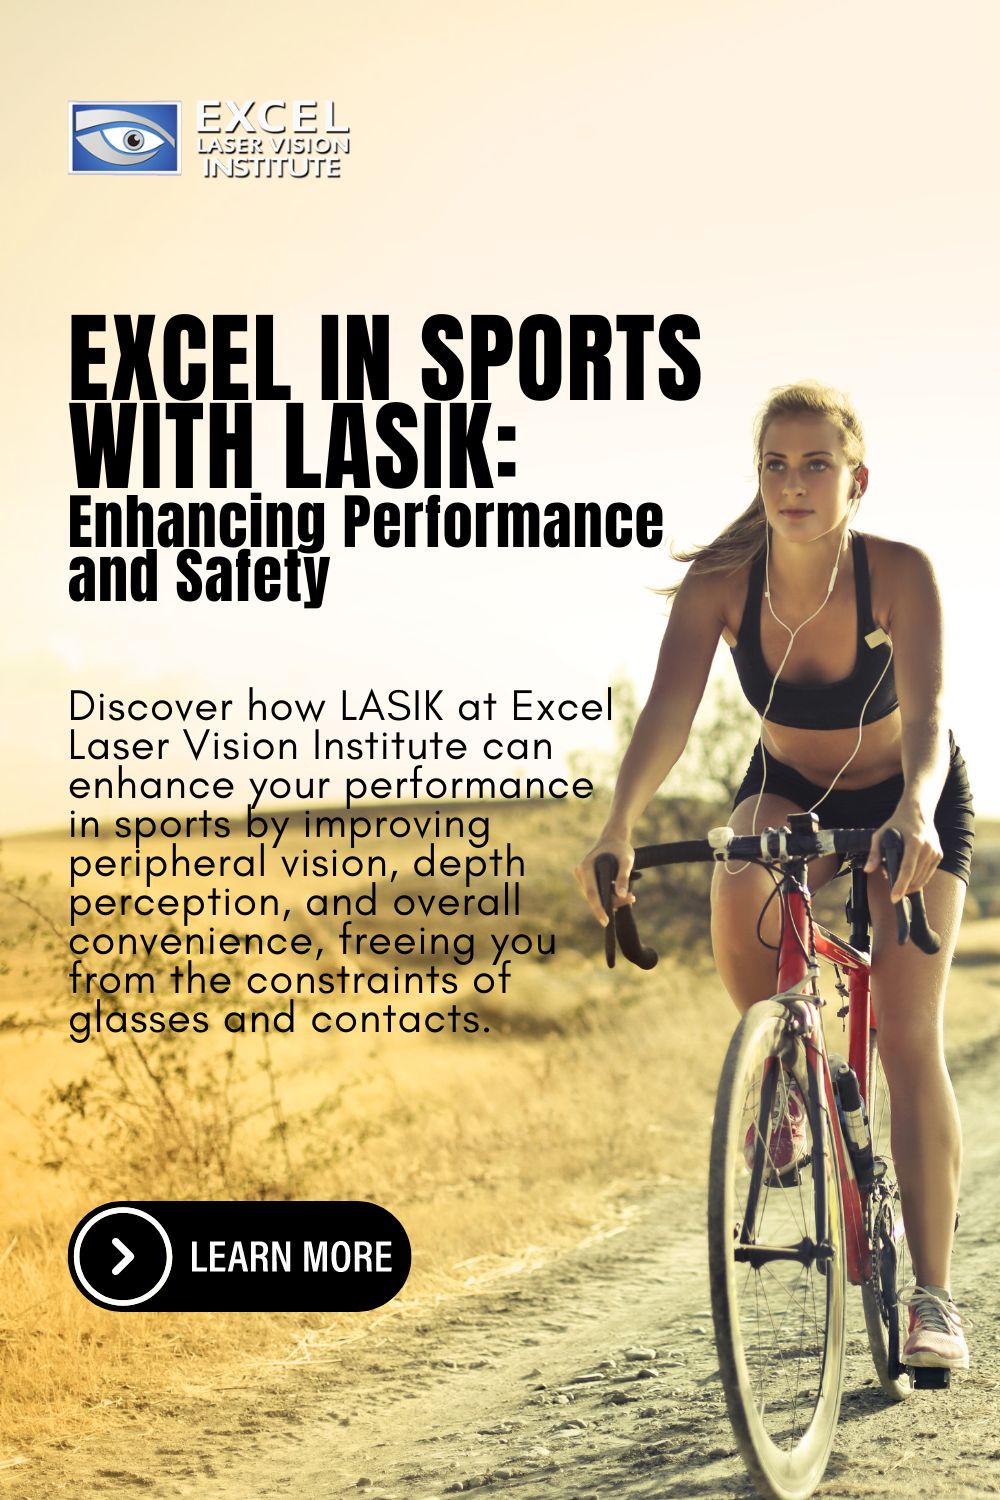 woman-riding-a-bicycle-blog-title-Excel-in-Sports-with-LASIK-Enhancing-Performance-and-Safety-Pinterest-Pin